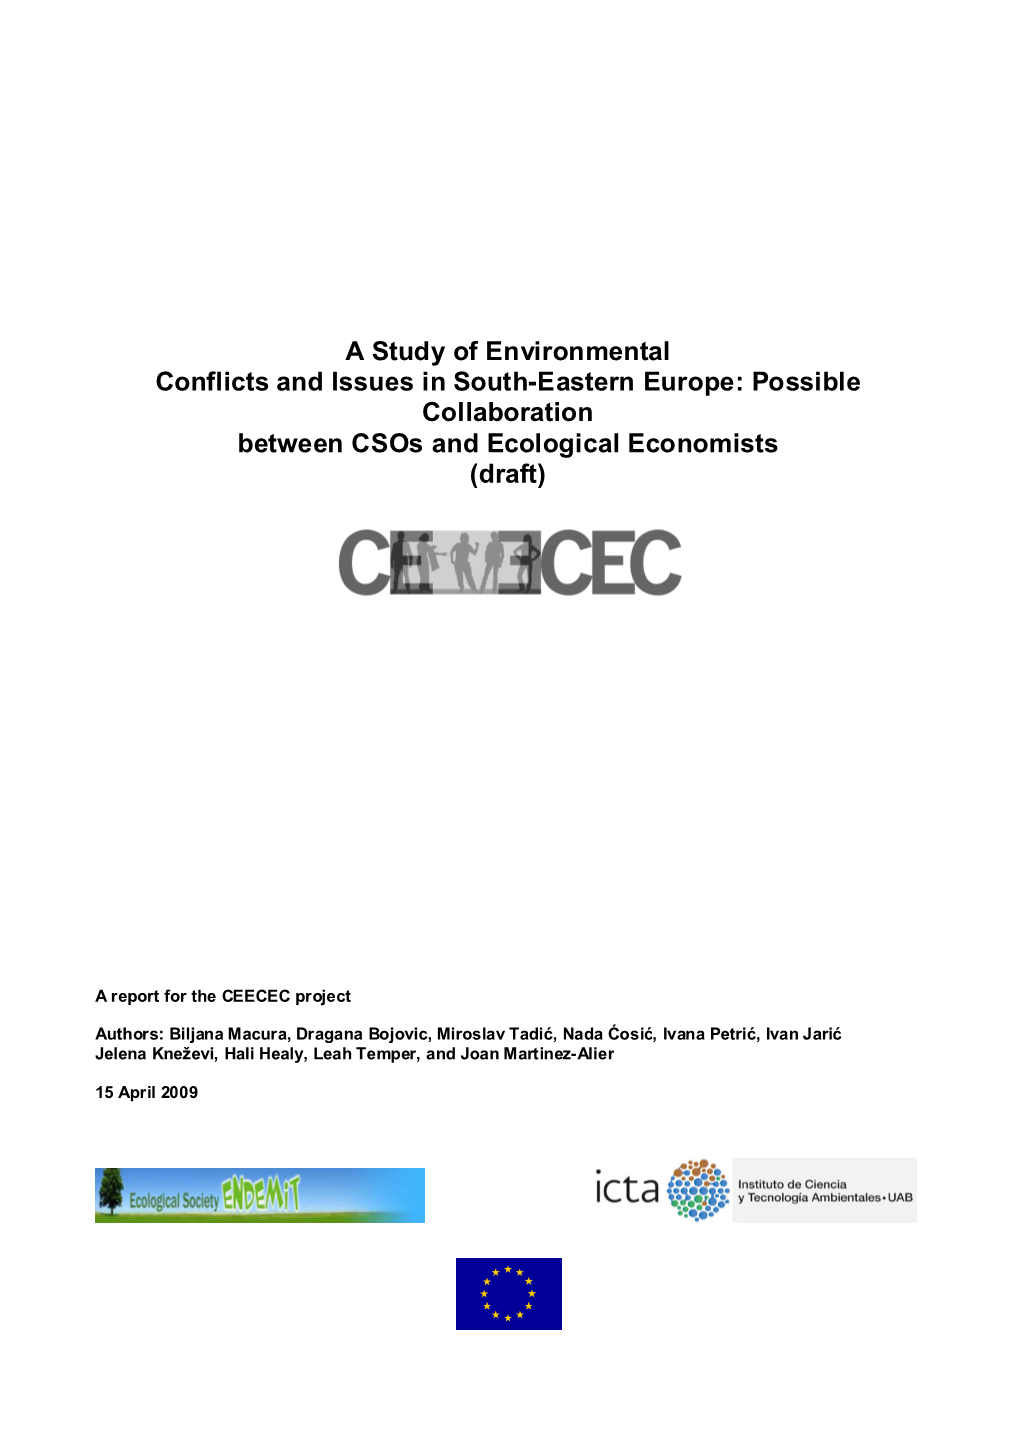 A Study of Environmental Conflicts and Issues in South-Eastern Europe: Possible Collaboration Between Csos and Ecological Economists (Draft)